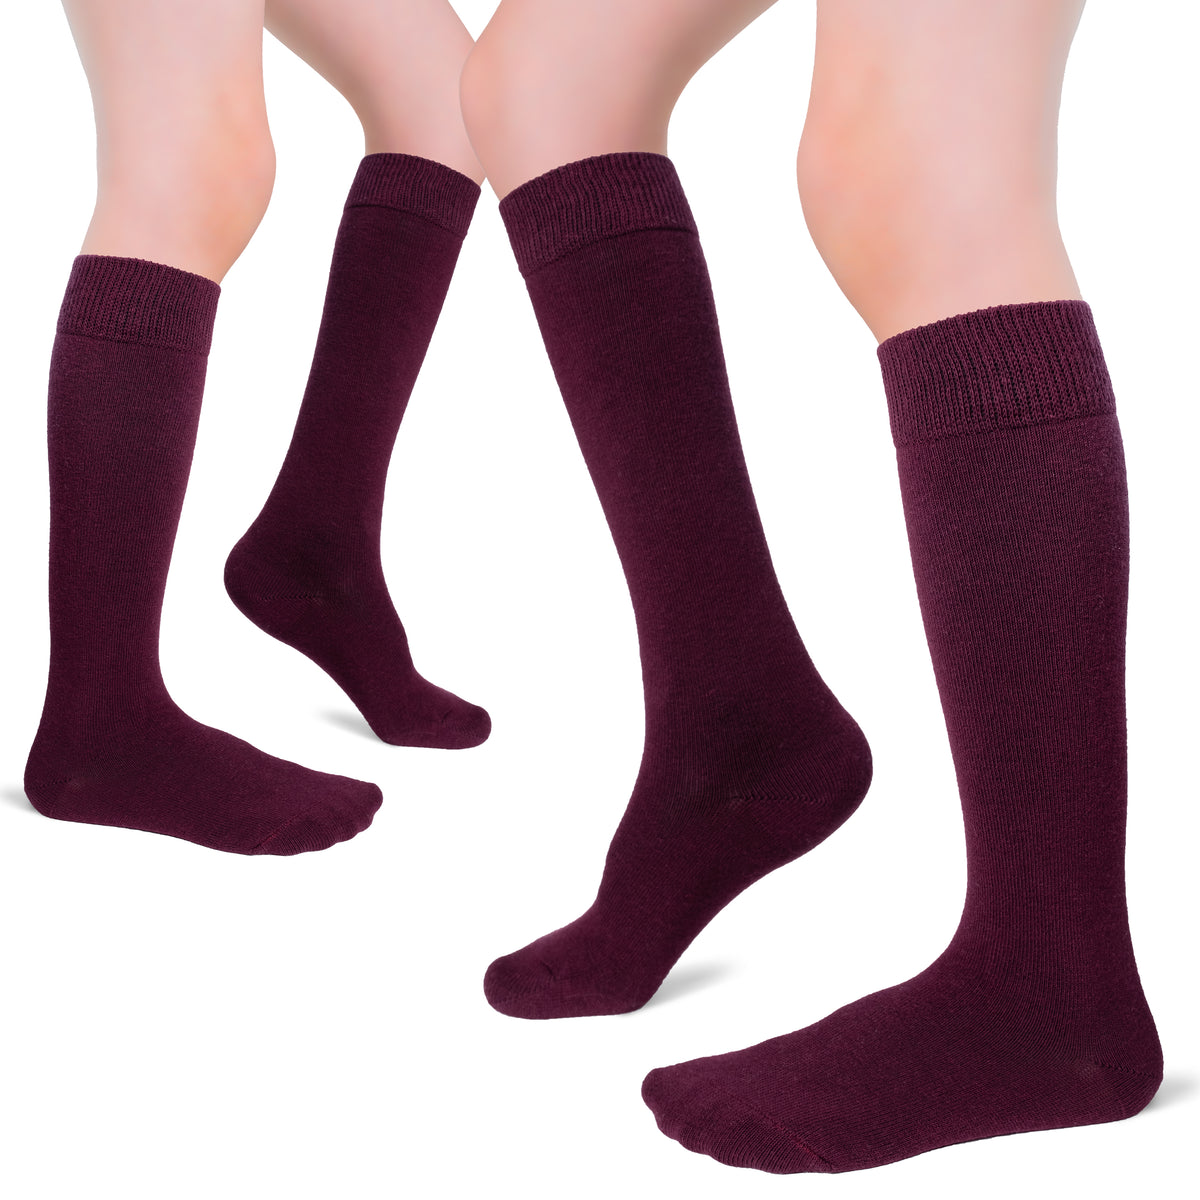 These Kids' Cotton Knee-High socks come in two pairs, with one pair being purple. Perfect for women who want comfort and style in their socks.